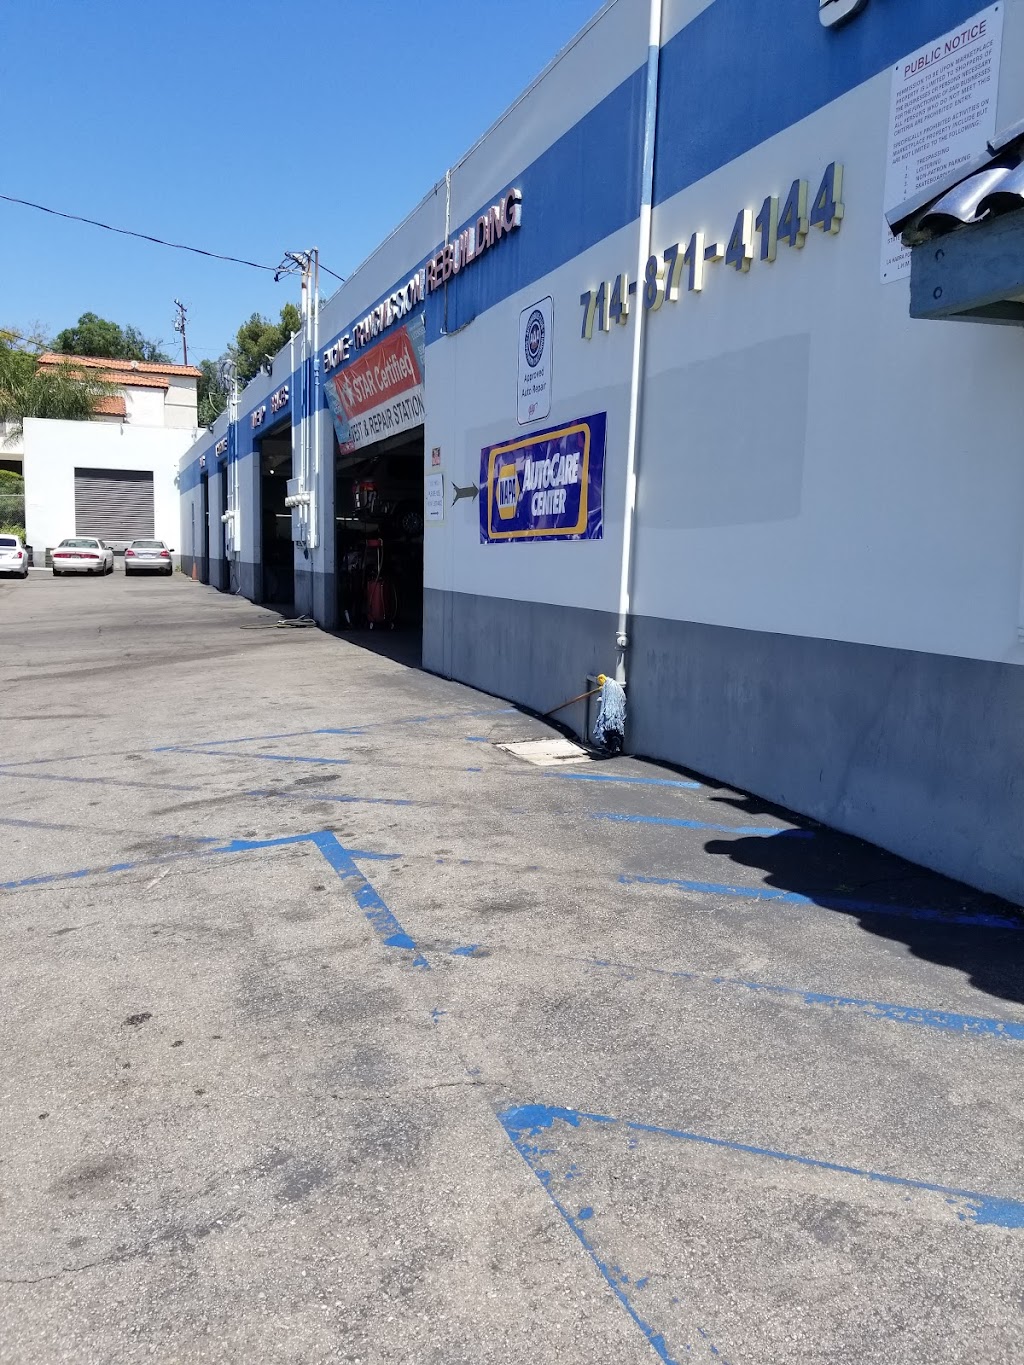 All Tune and Lube | 521 W Imperial Hwy, La Habra, CA 90631, USA | Phone: (714) 871-4144